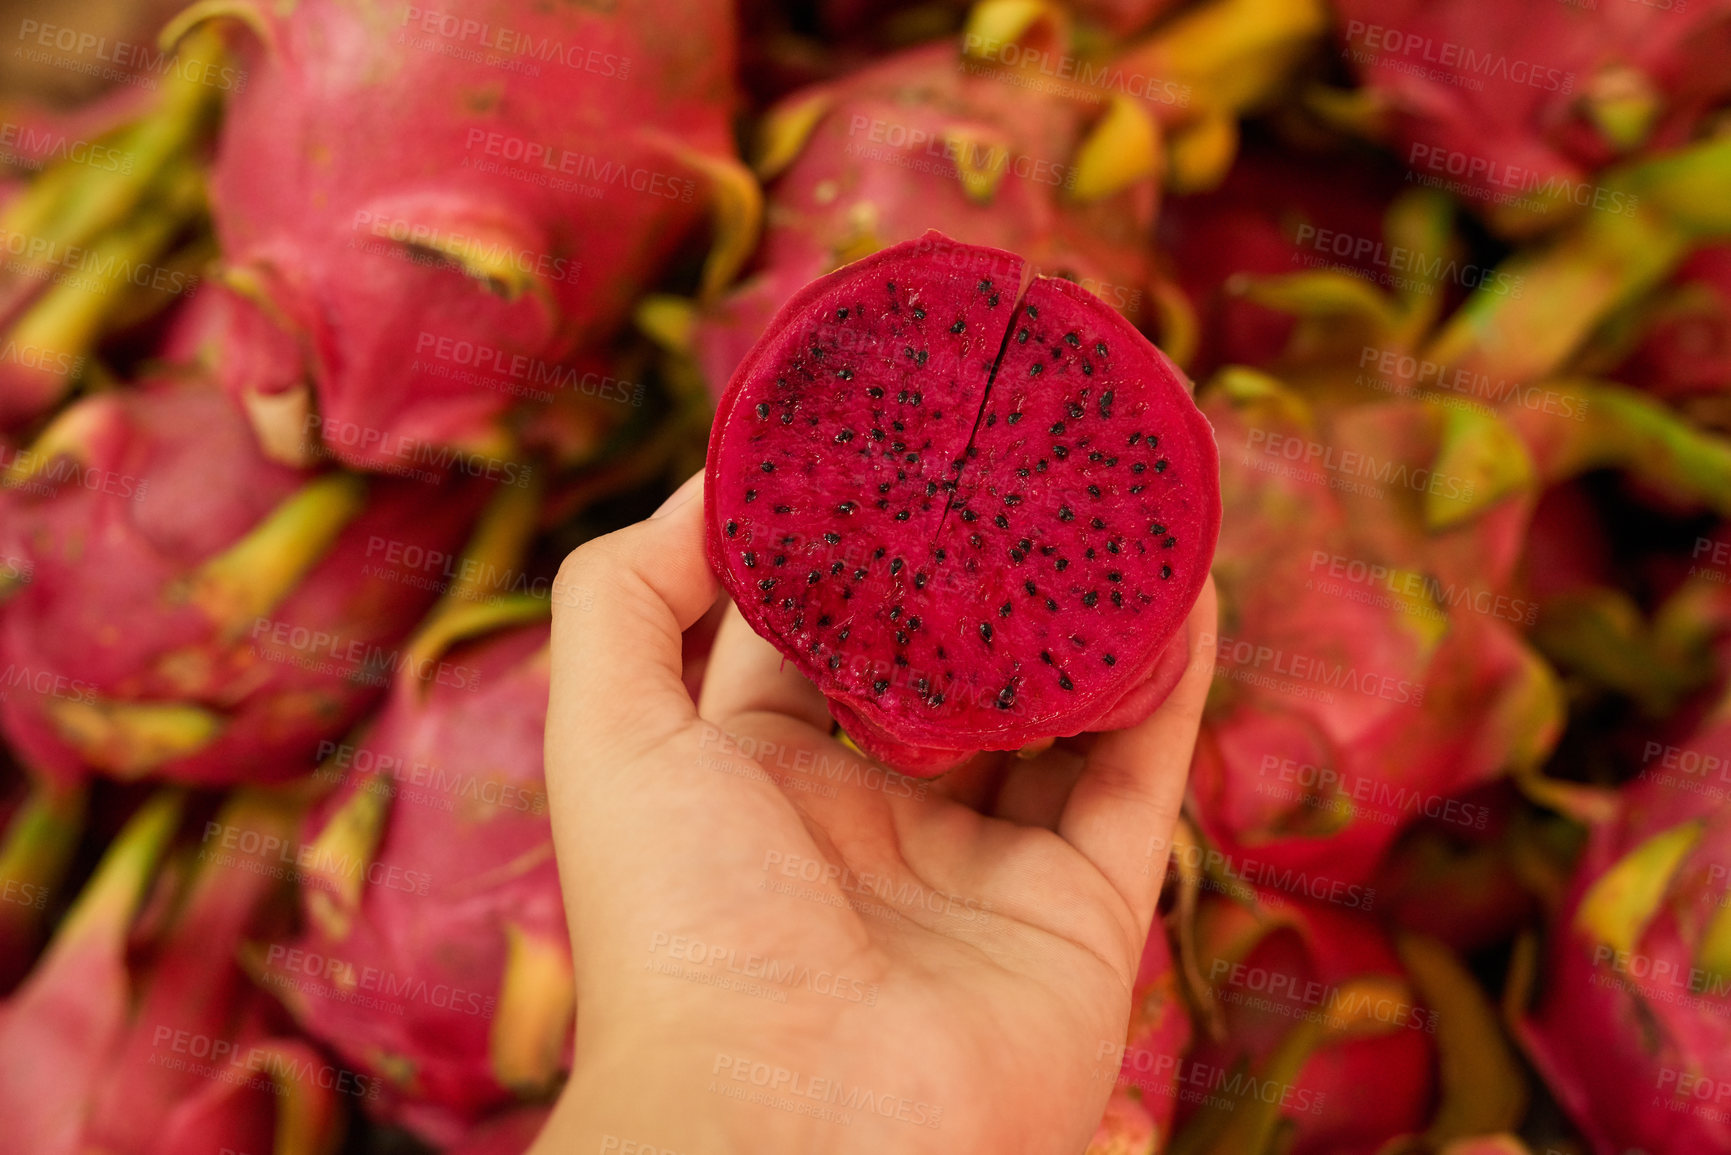 Buy stock photo Shot of an unidentifiable woman holding a halved dragon fruit at a fruit market